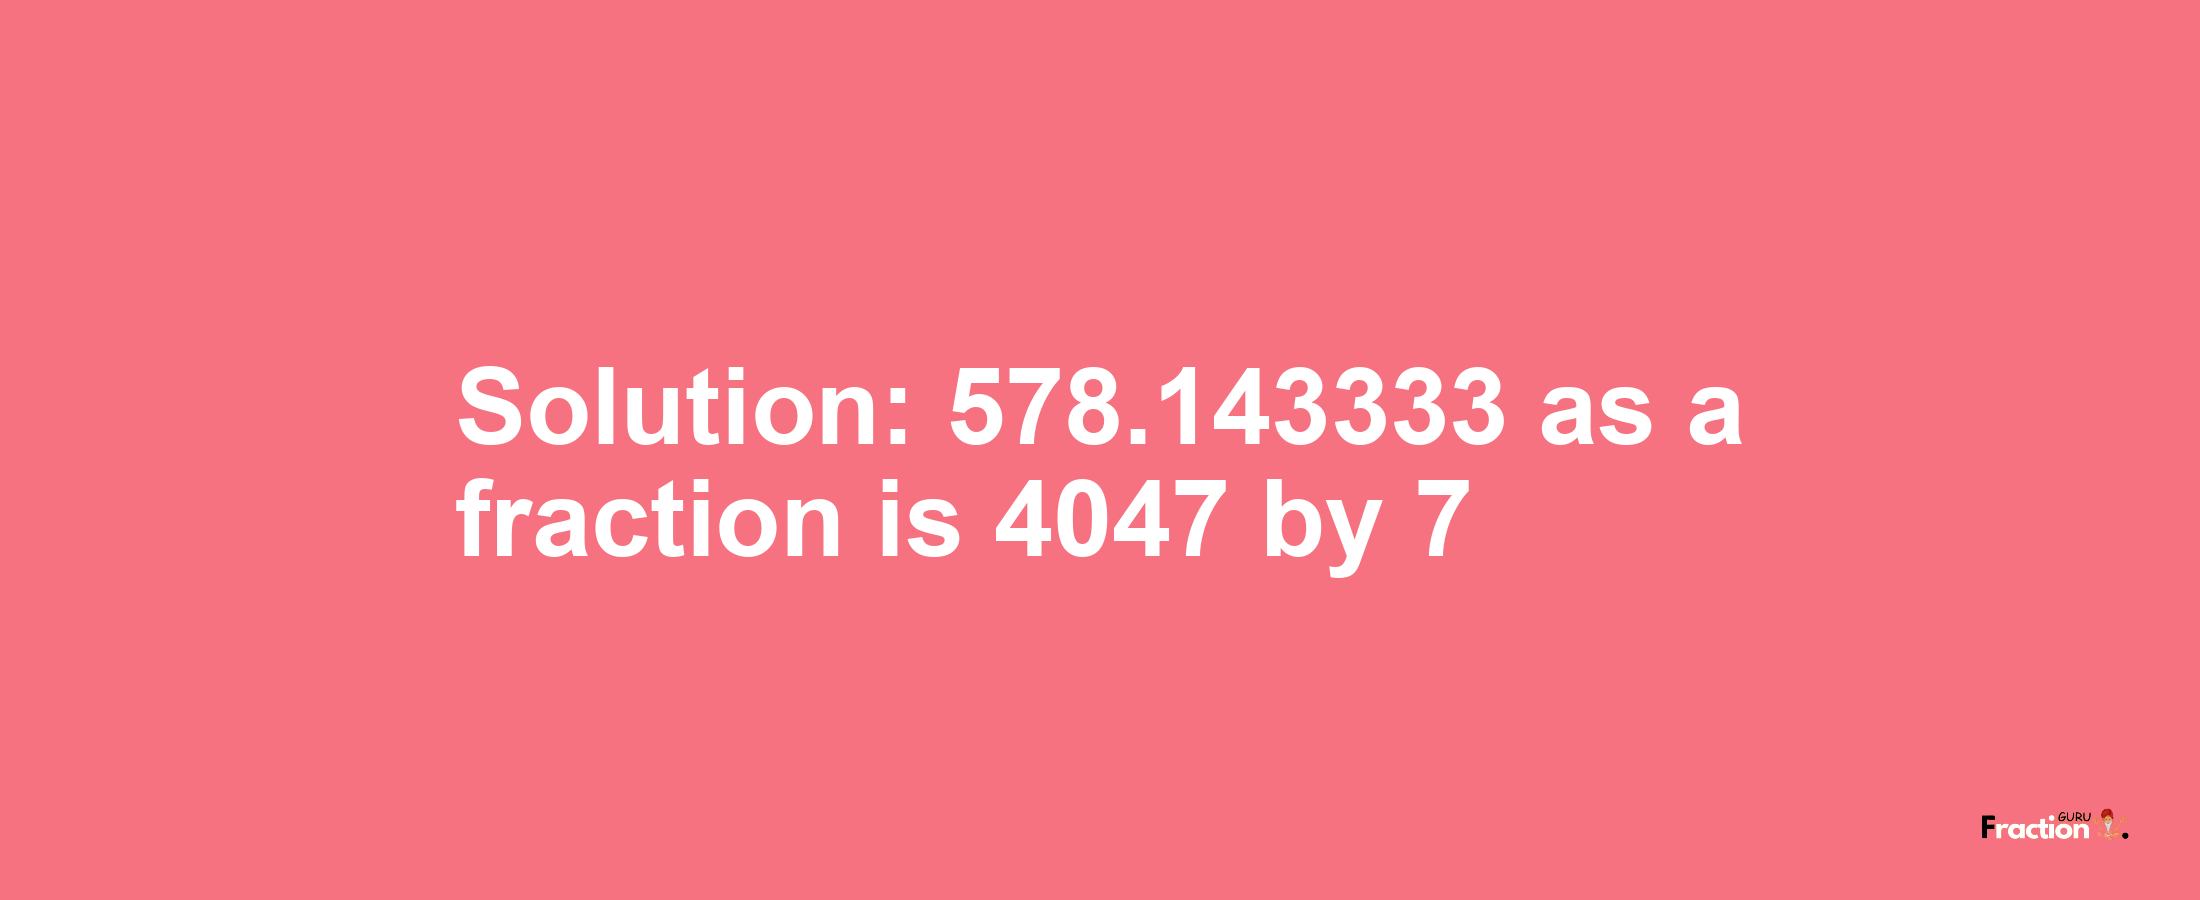 Solution:578.143333 as a fraction is 4047/7